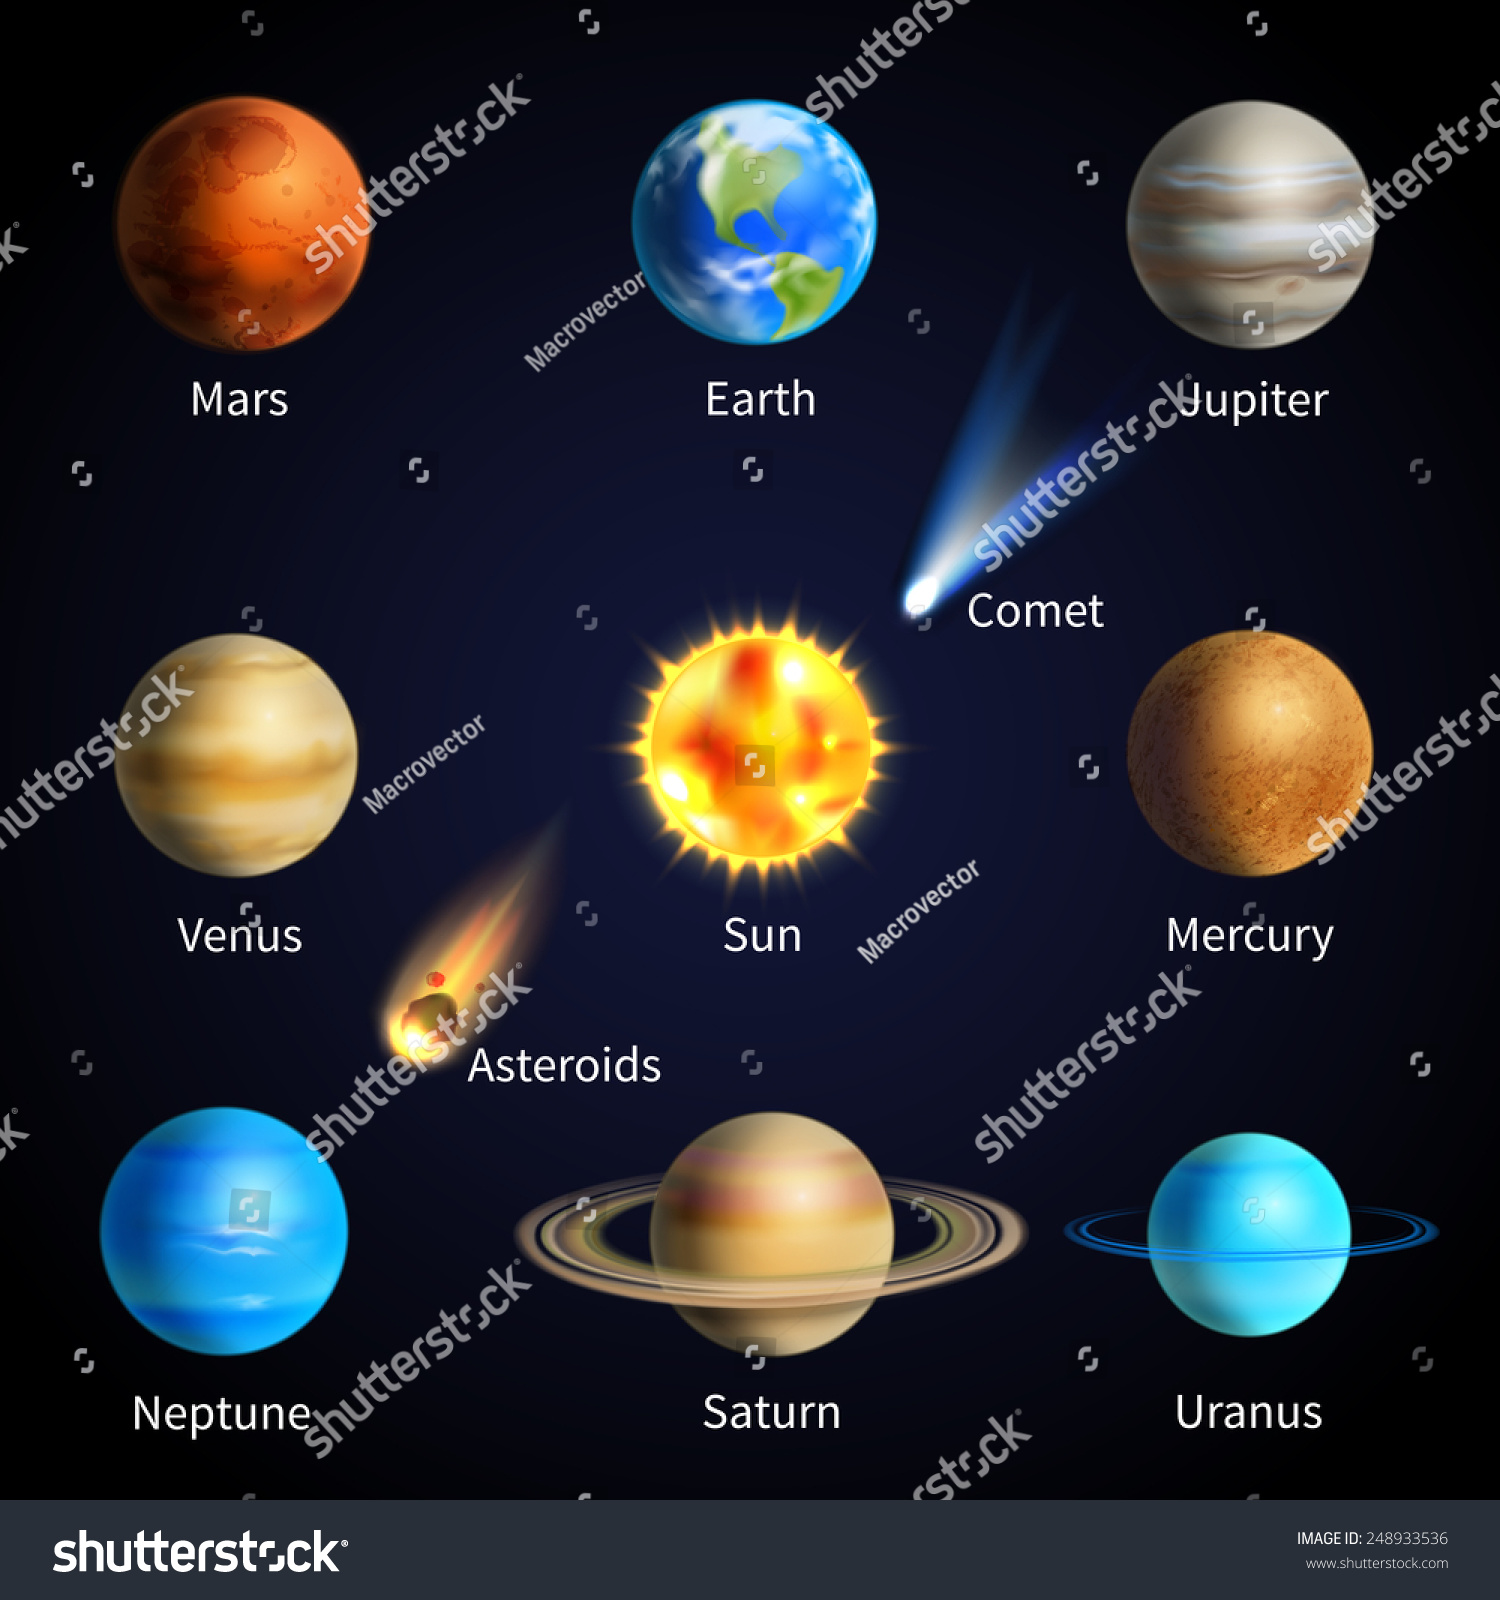 Solar System Objects